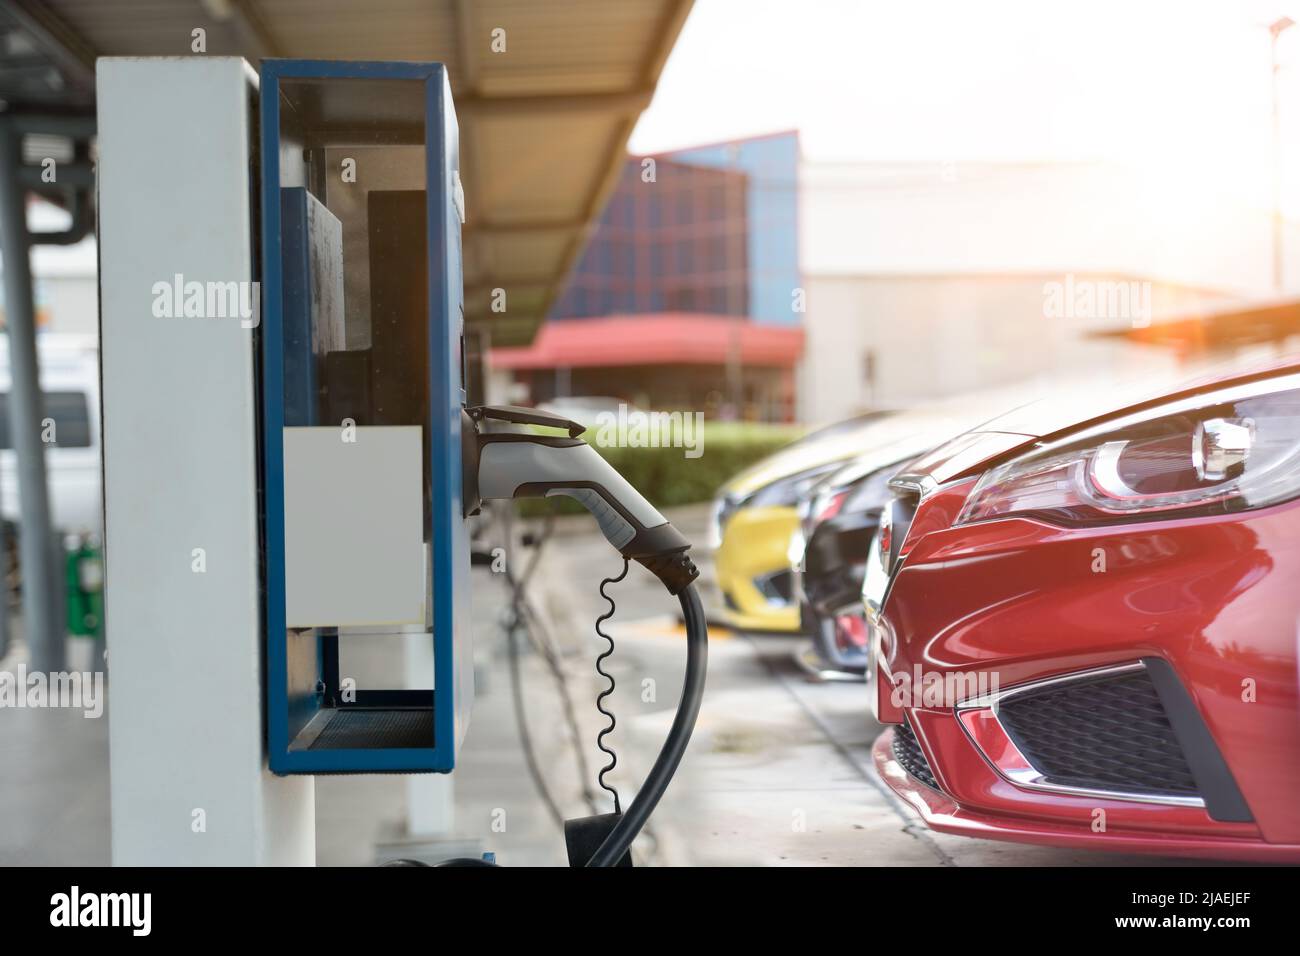 Electric car on electric car charging station. Power supply for electric car charging. Clean energy concept Stock Photo